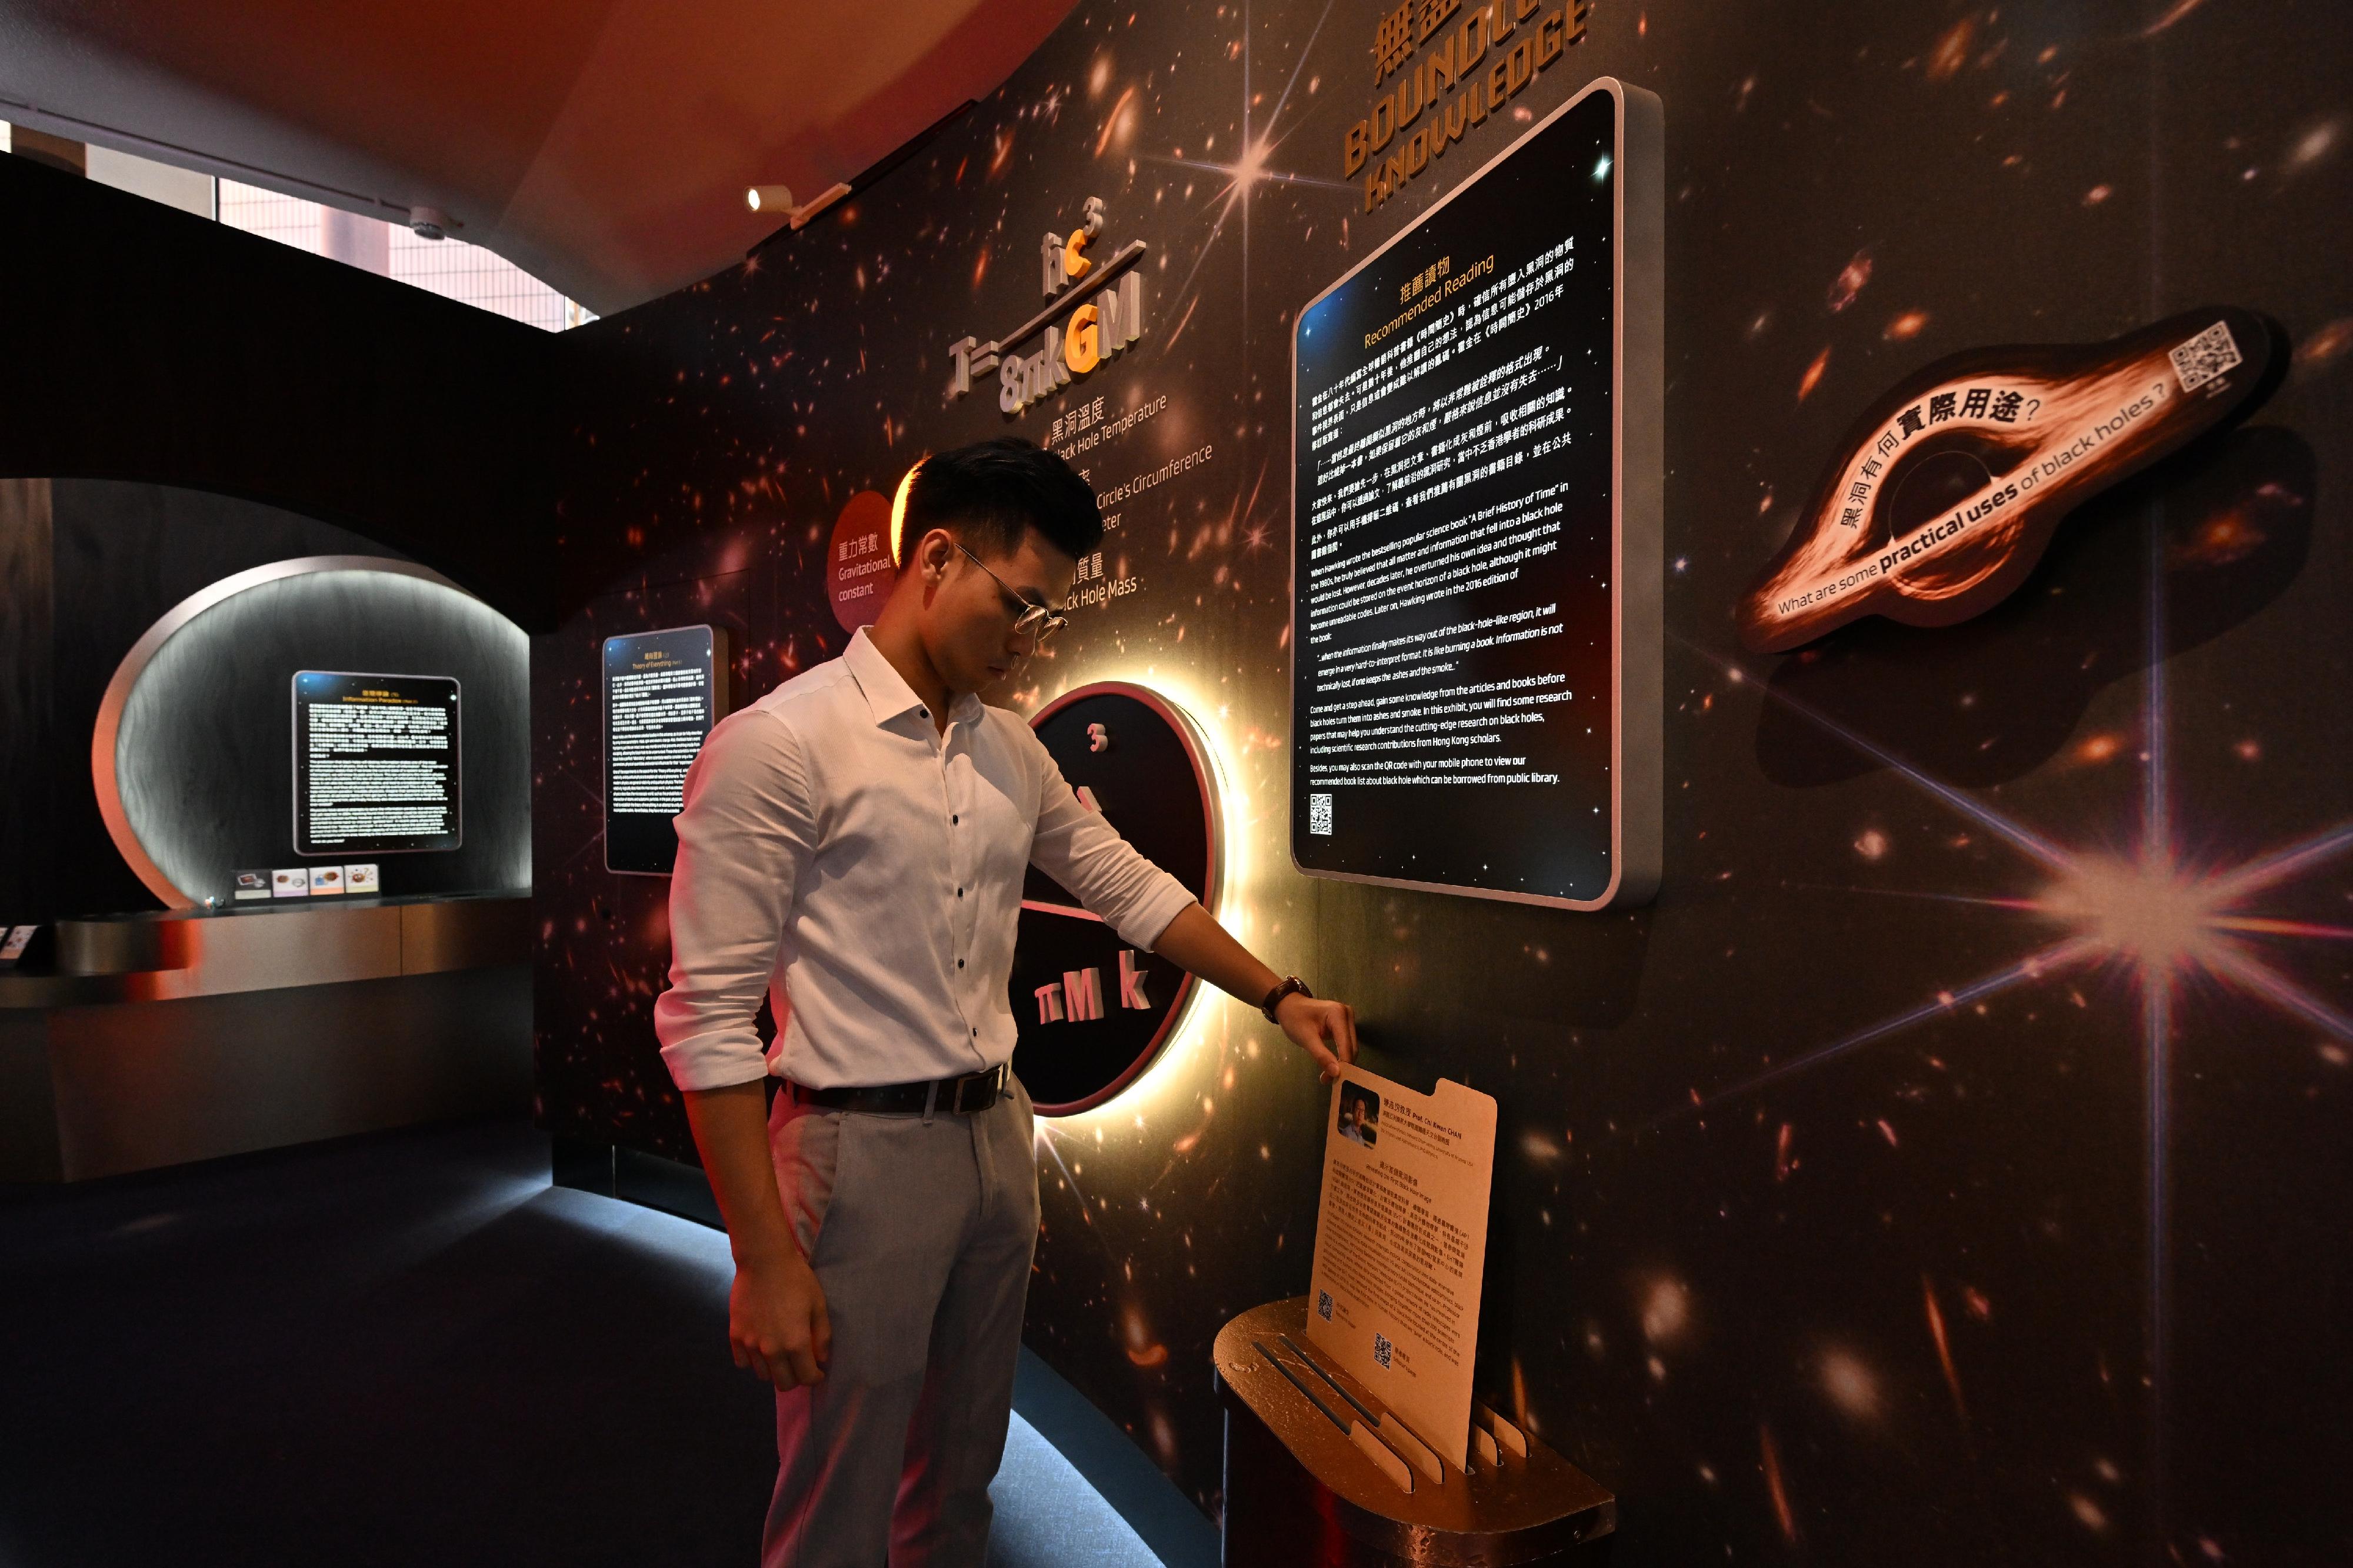 The Hong Kong Space Museum will launch a new free special exhibition, "Black Hole: The Information Barrier", starting tomorrow (October 25). The exhibition explores latest research on black holes by local scholars.